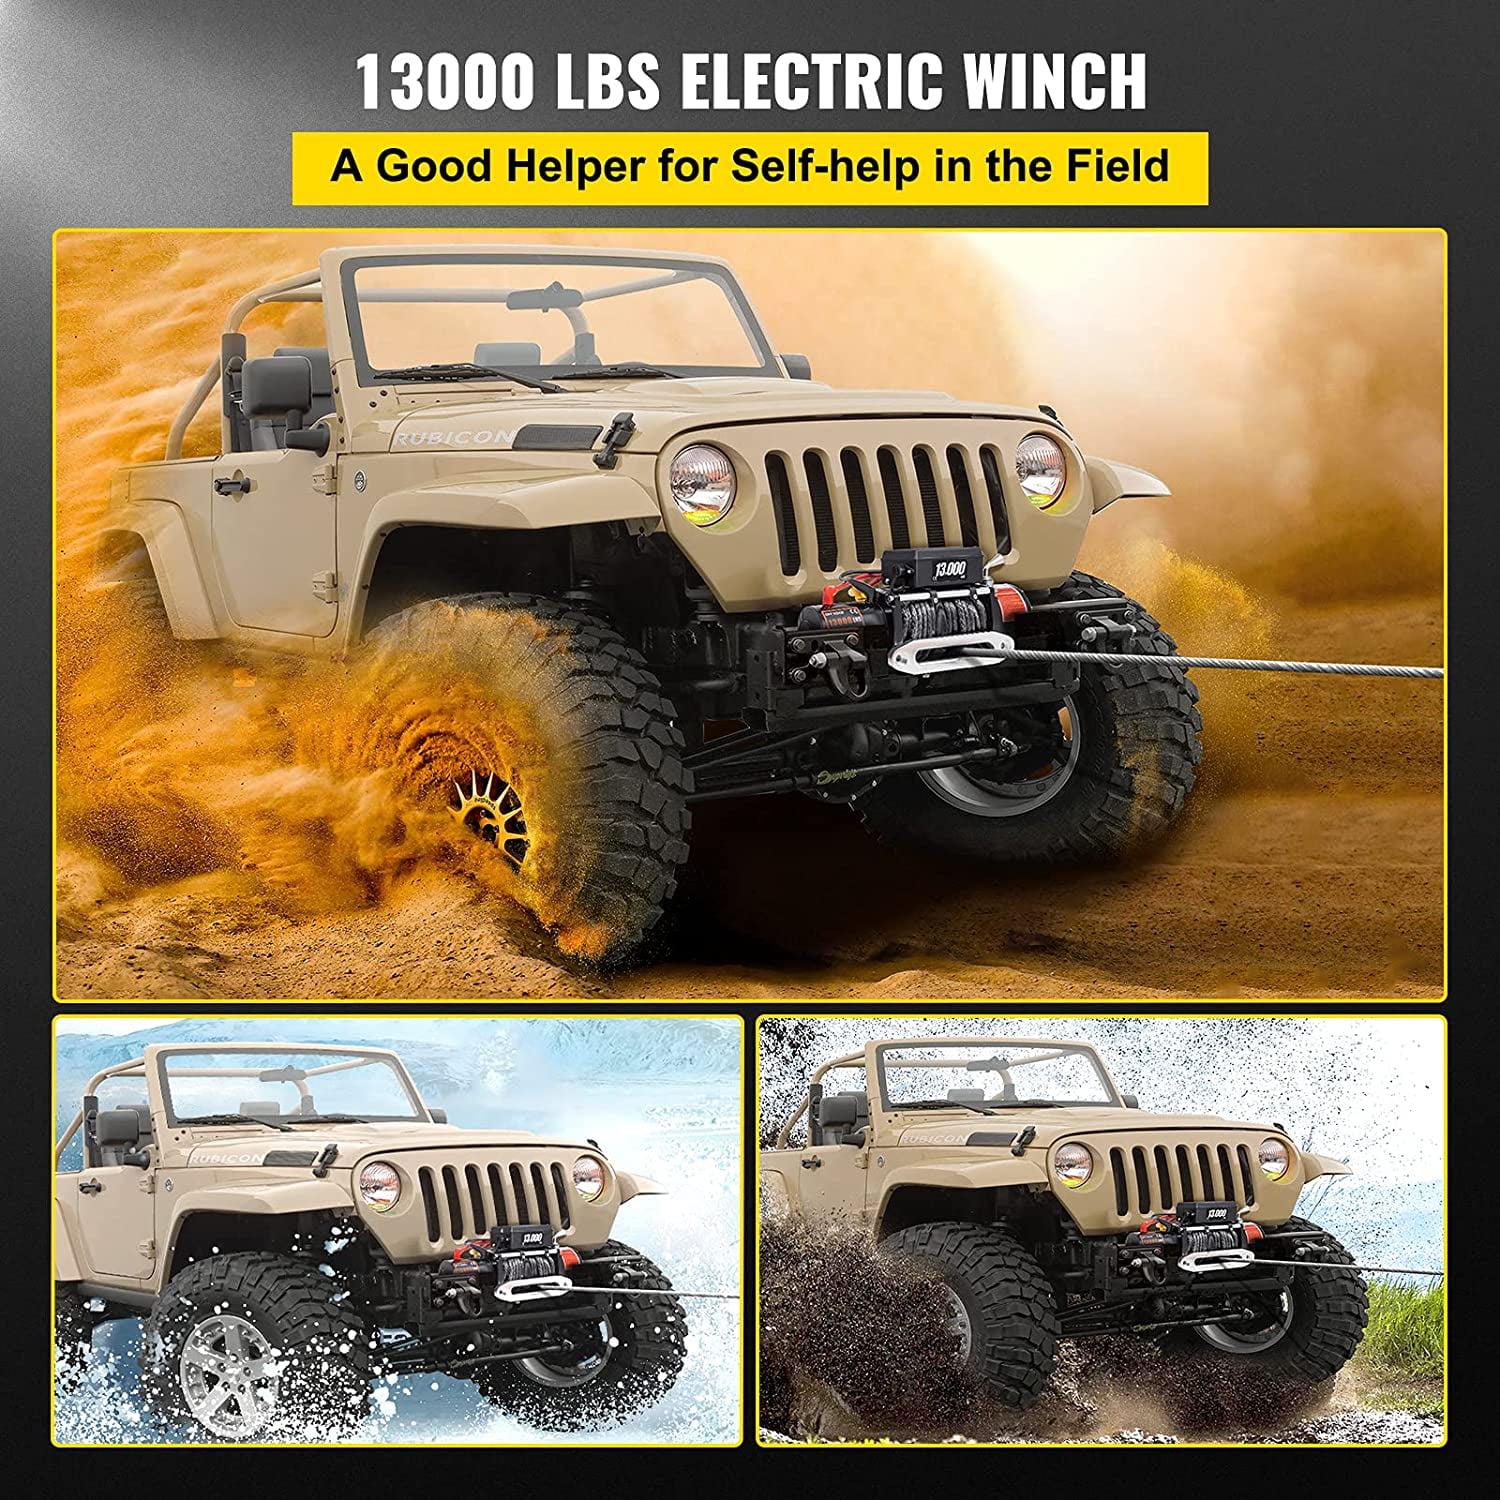 VEVOR Truck Winch 13000lbs Electric Winch 26m/85ft Cable Steel 12V Power Winch Jeep Winch with Wireless Remote Control and Powerful Motor for UTV ATV & Jeep Truck and Wrangler in Car Lift 